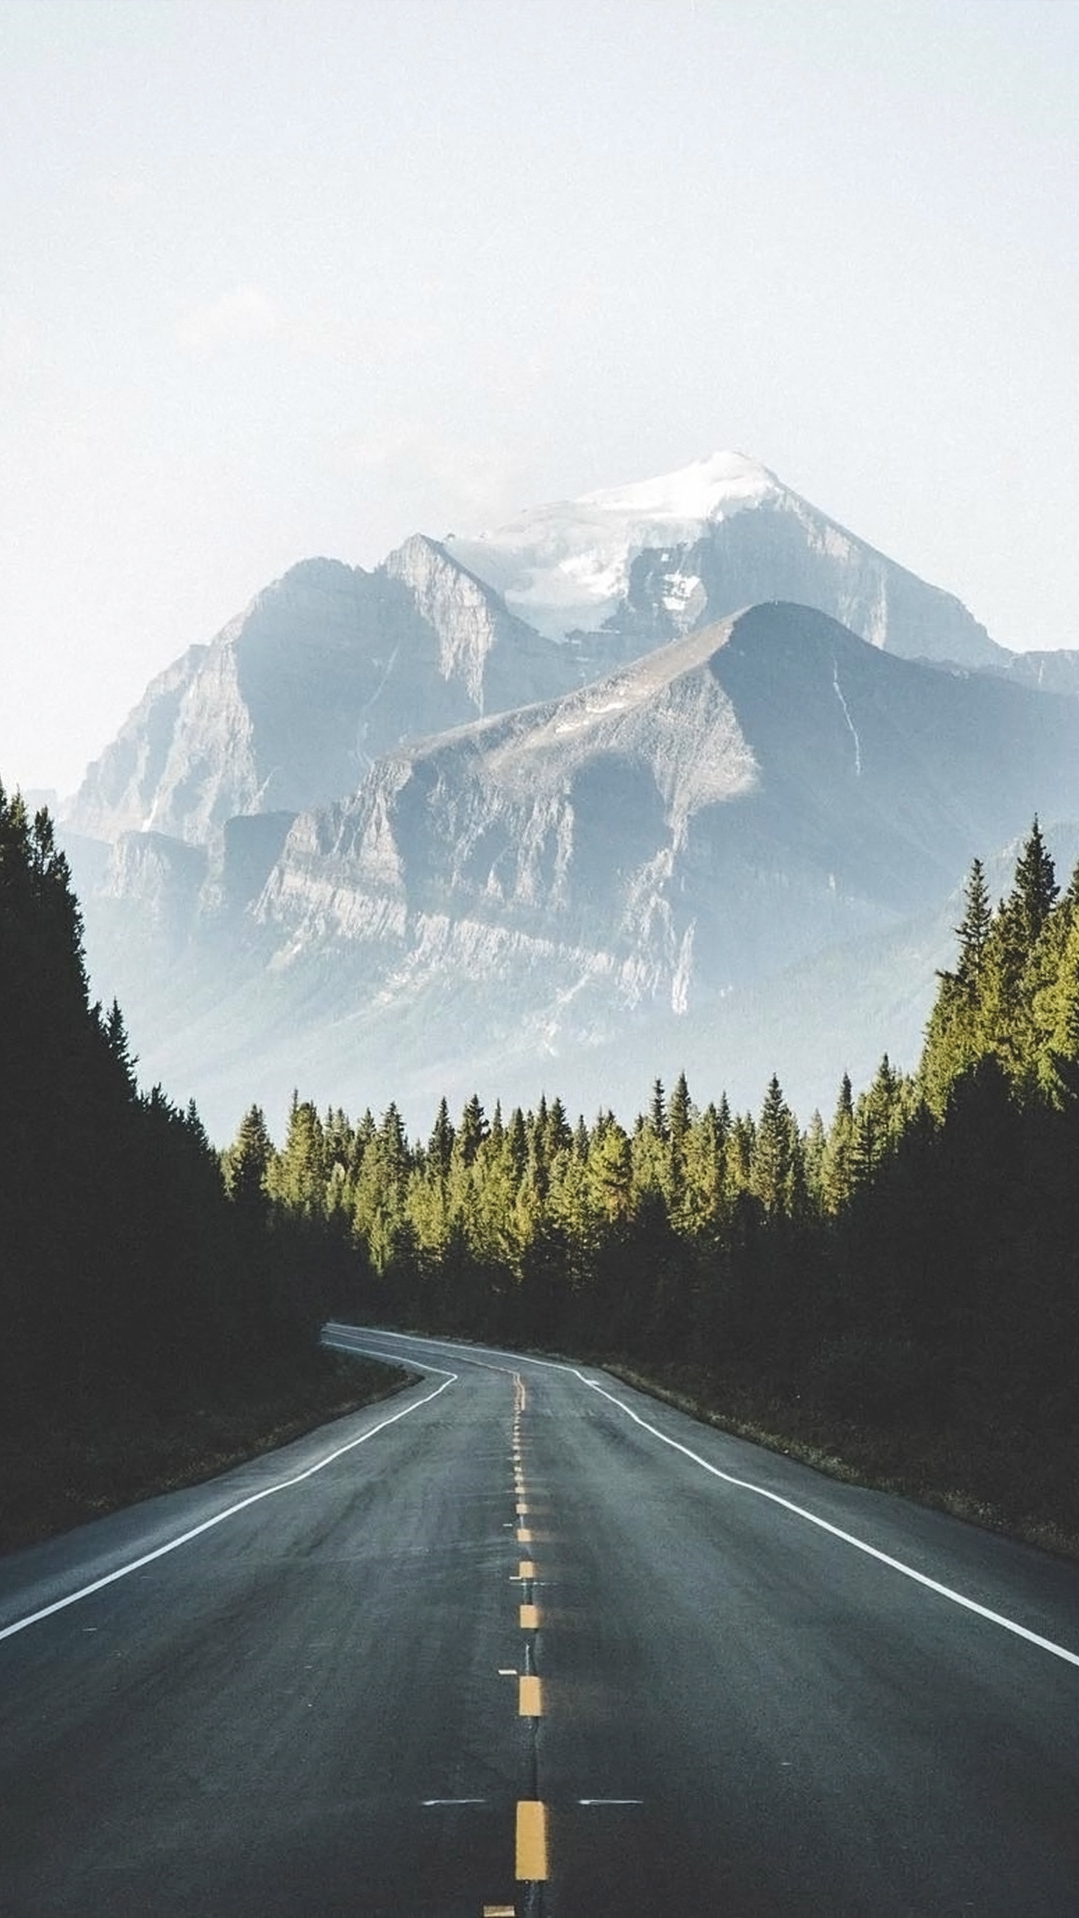 Road To Mountains USA IPhone Wallpaper Wallpaper, IPhone Wallpaper